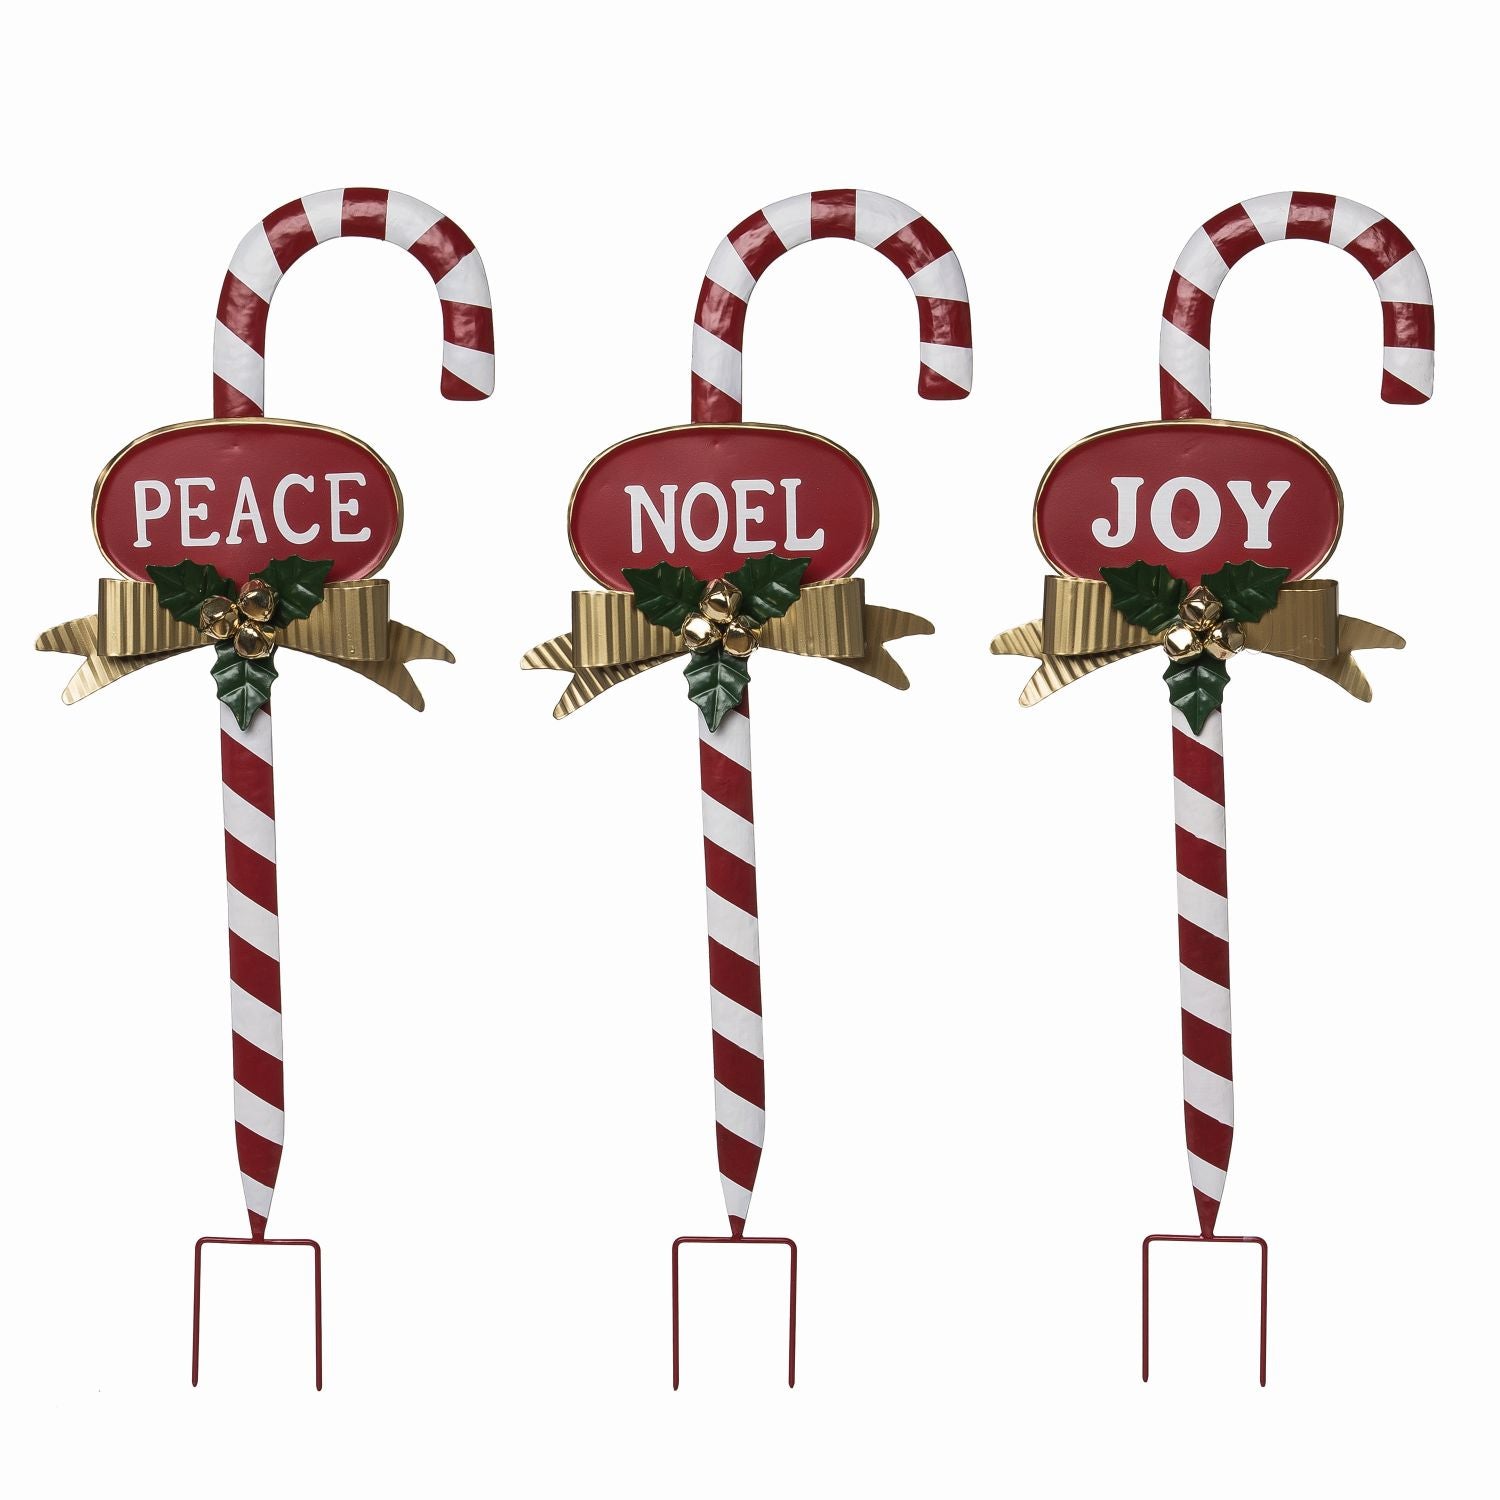 Holiday Theme Candy Canes Design Metal Paper Towel Holder